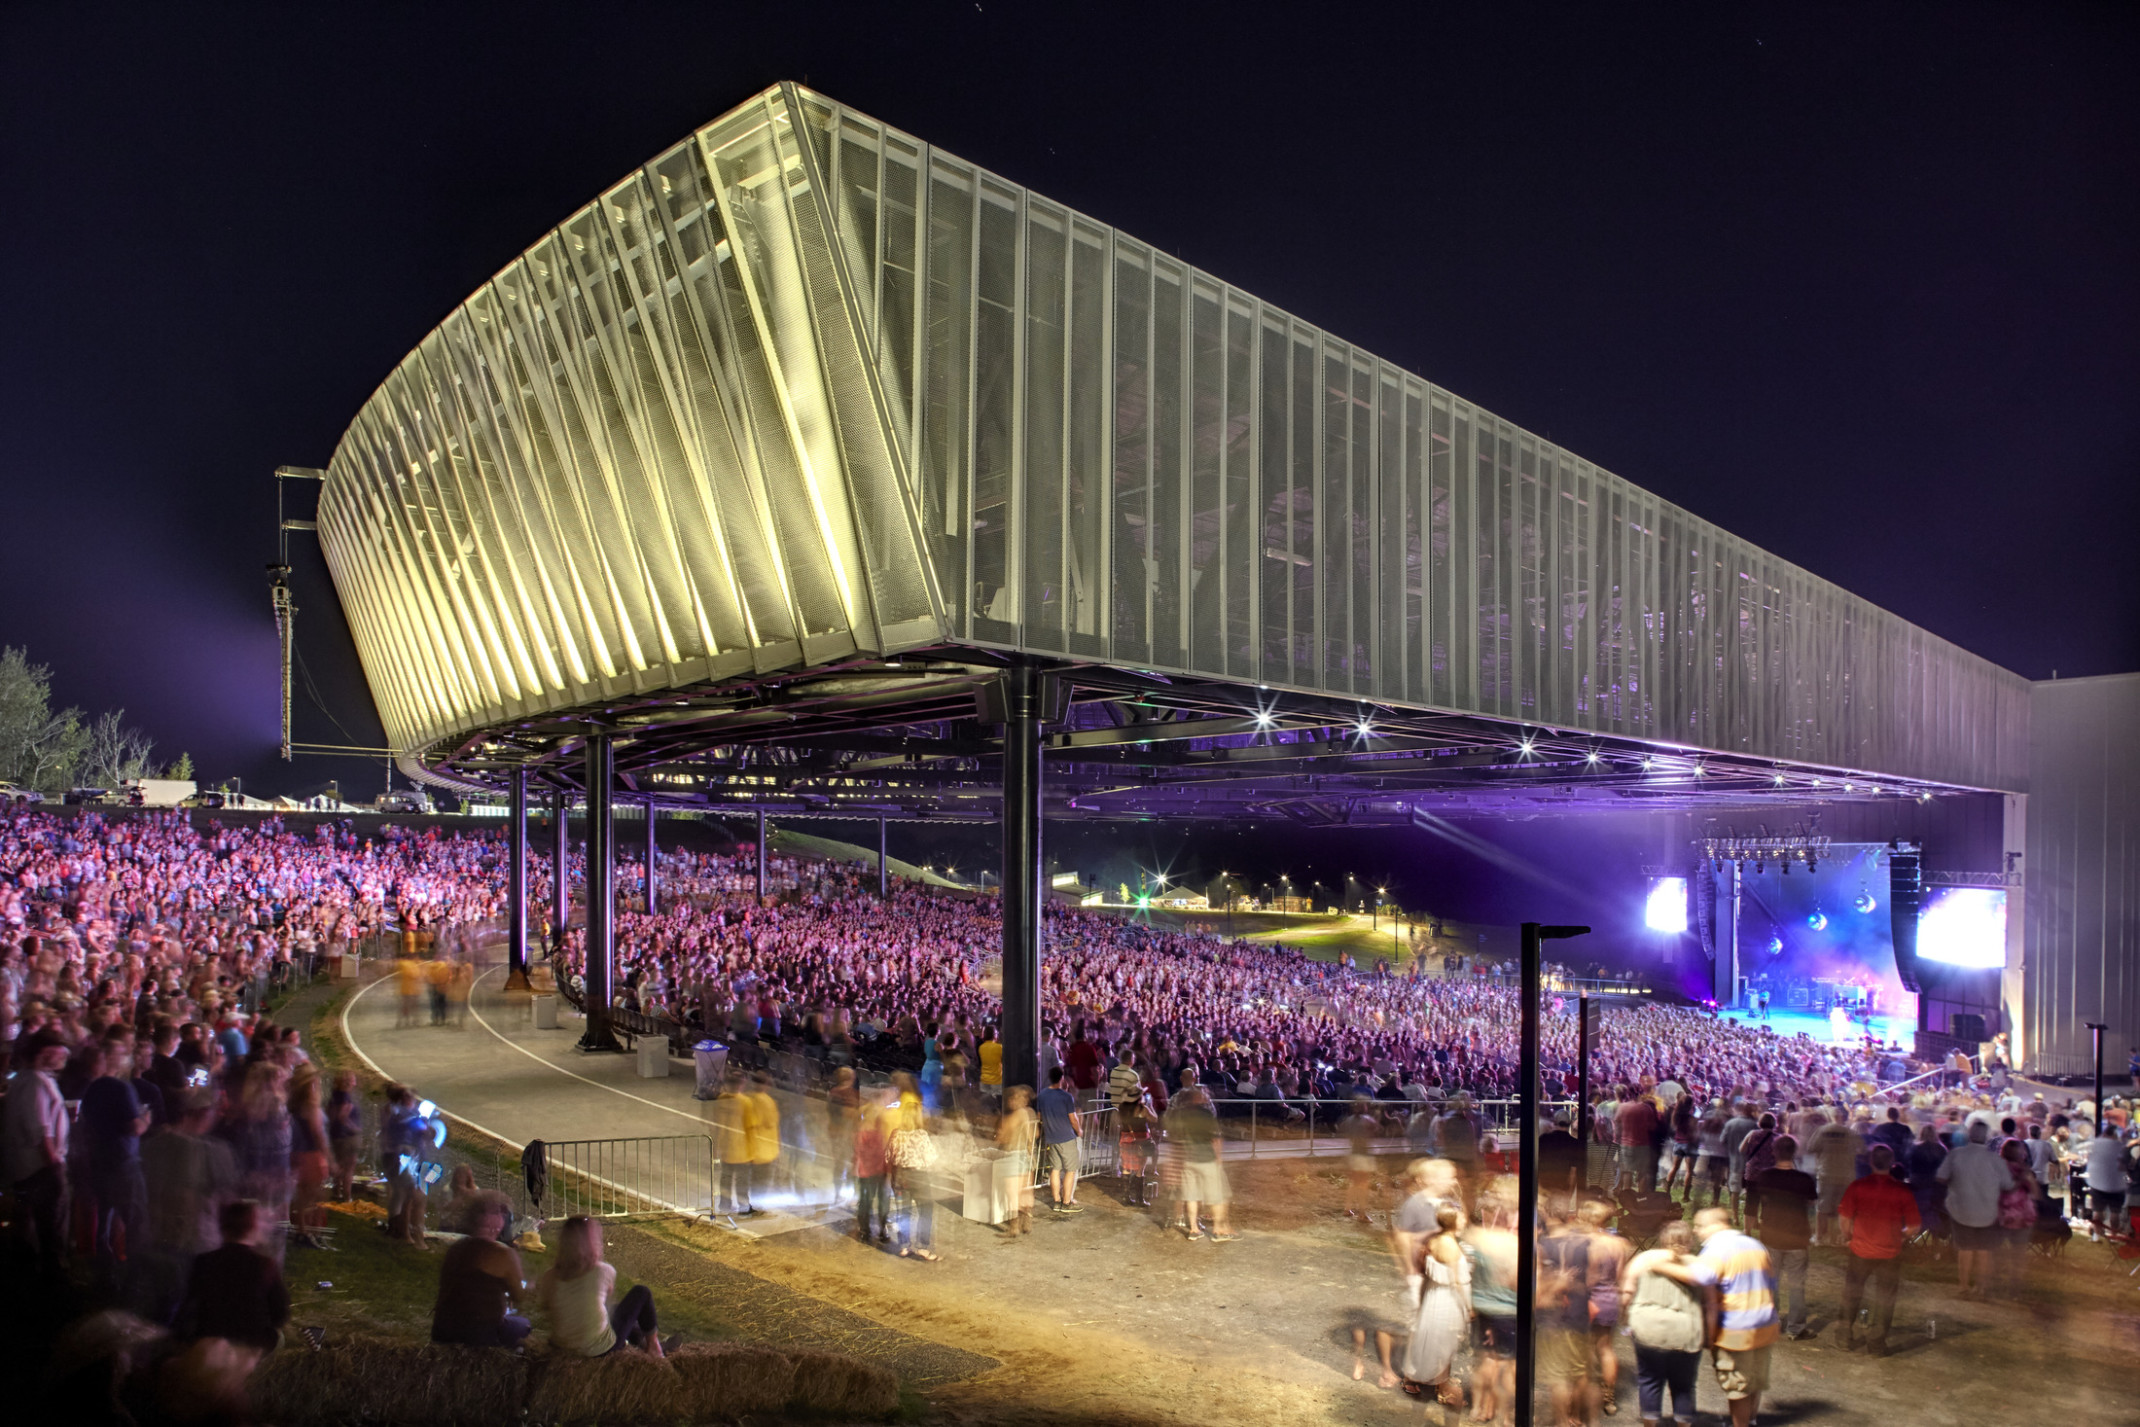 Corner view of crowd in partially covered St. Joseph Health Amphitheater at Lakeview at night while band performers on stage